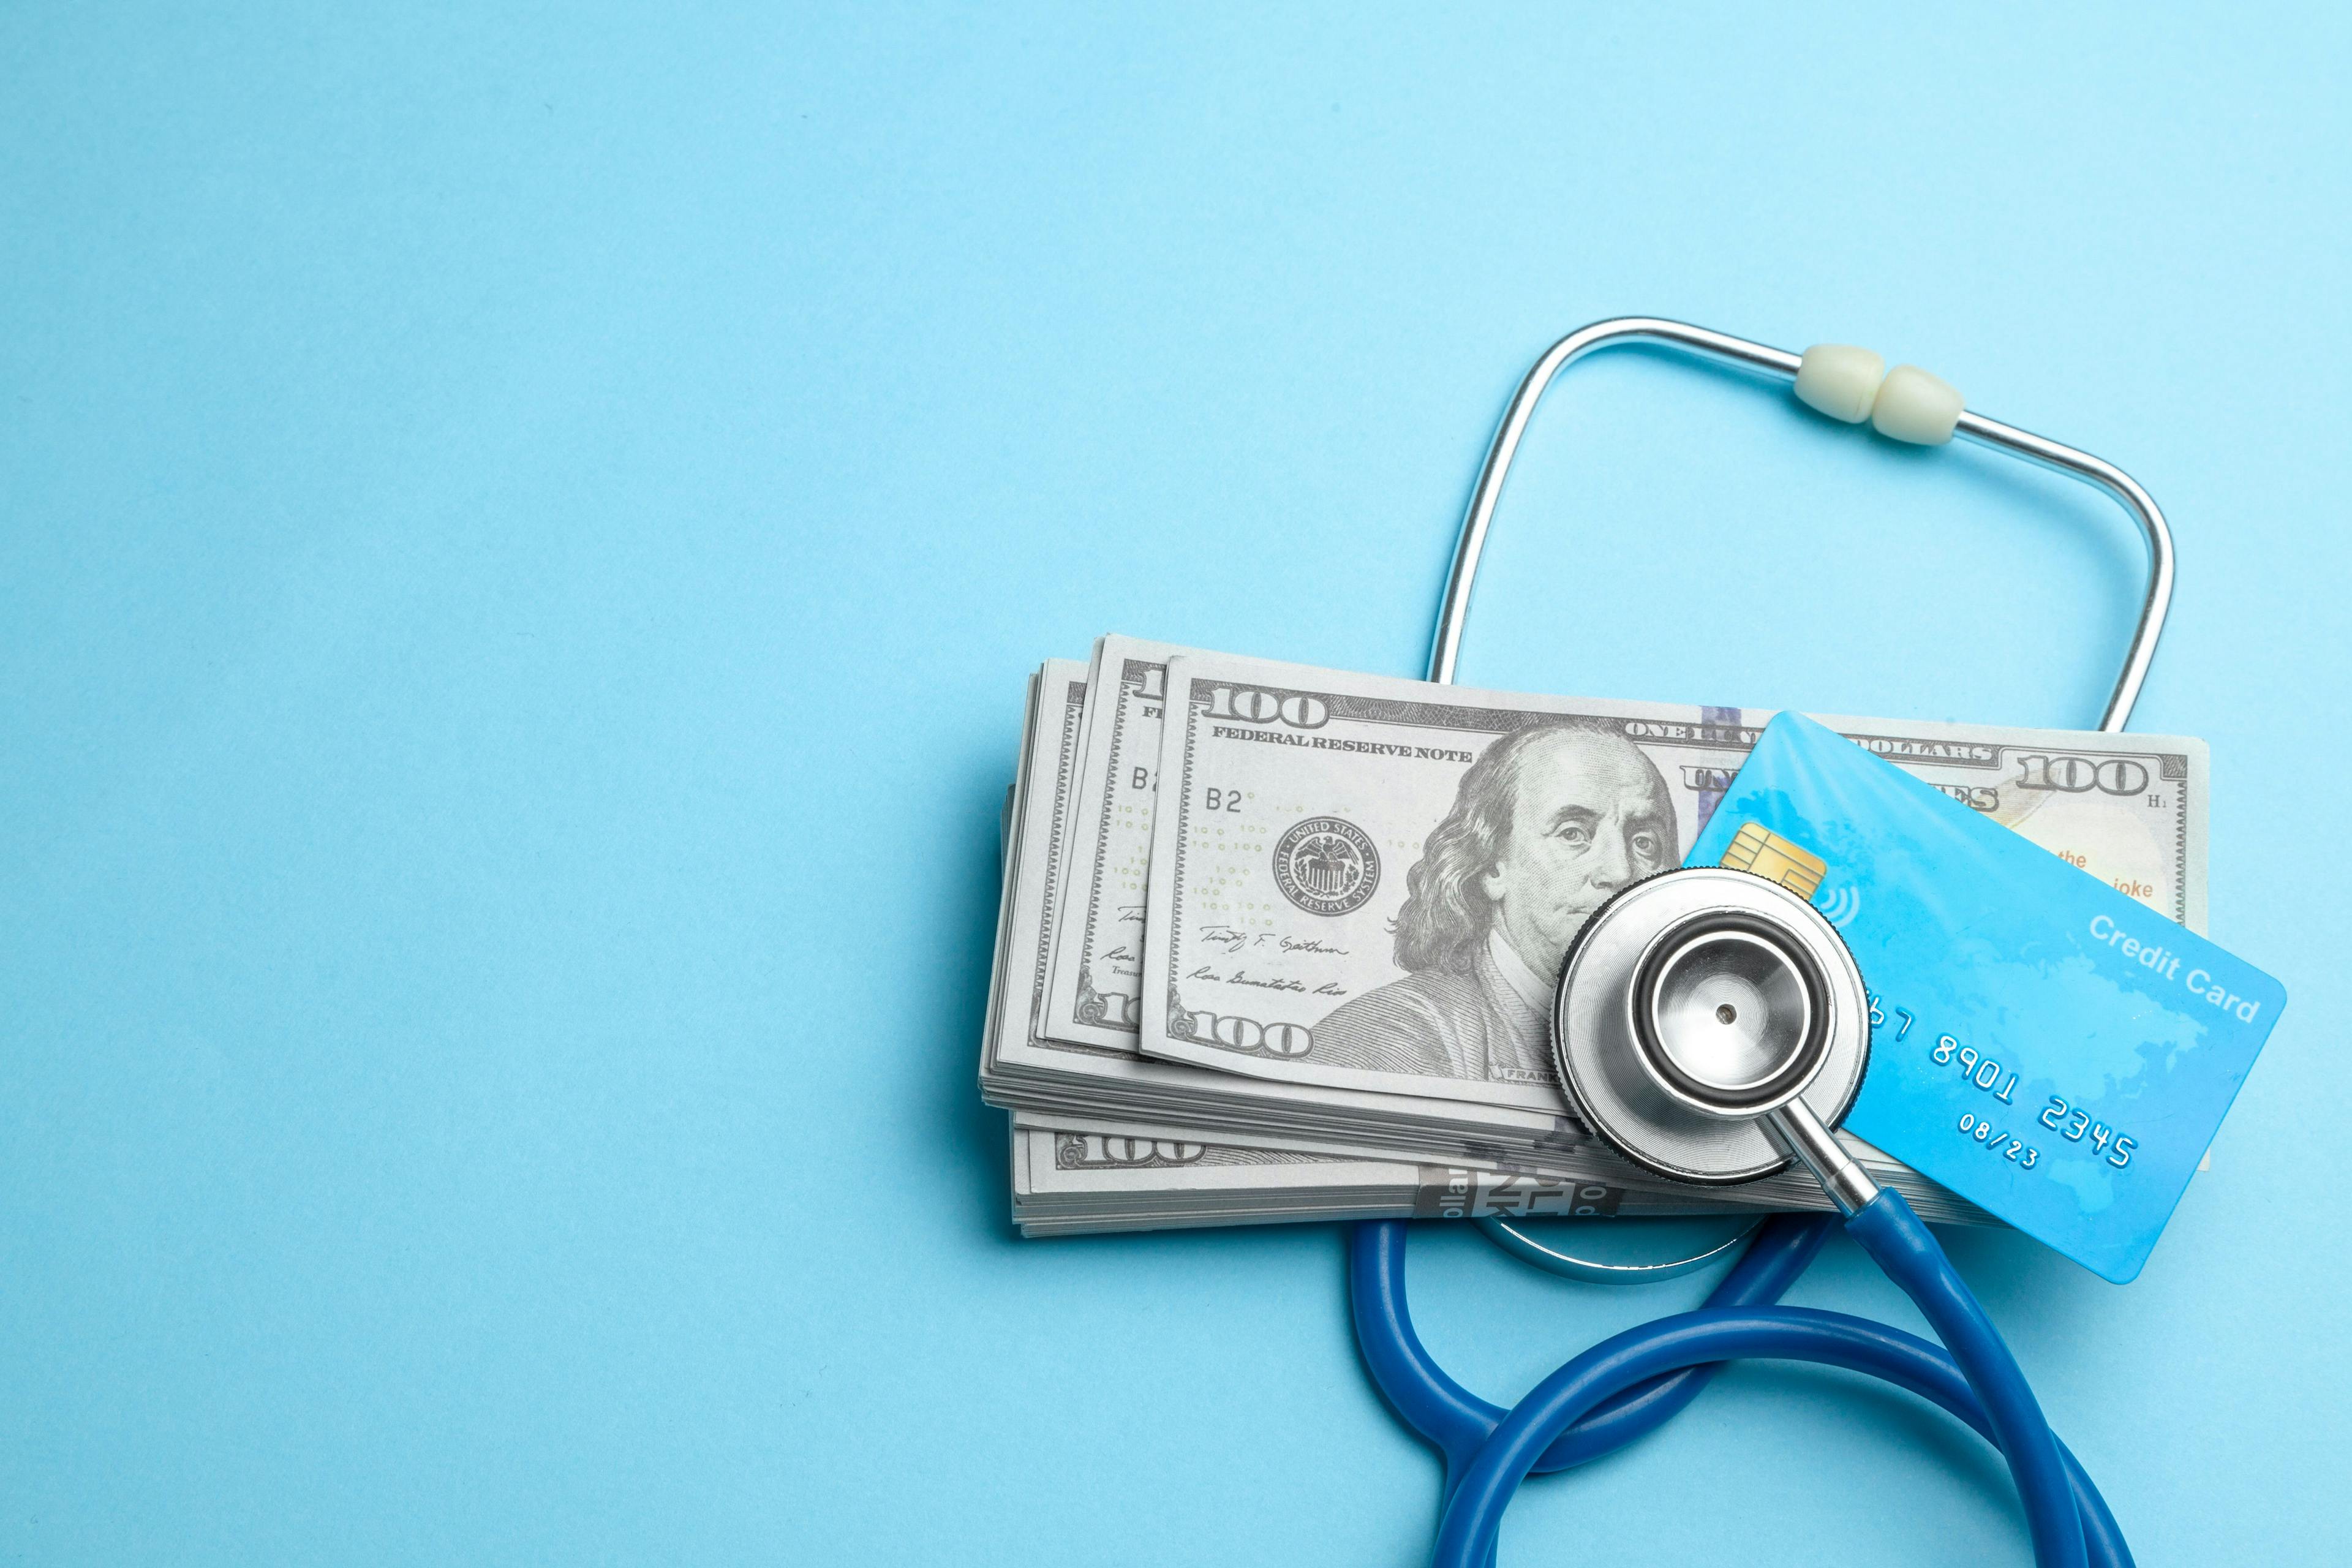 Cash and credit card with a stethoscope on a blue background | Image credit: adragan - stock.adobe.com